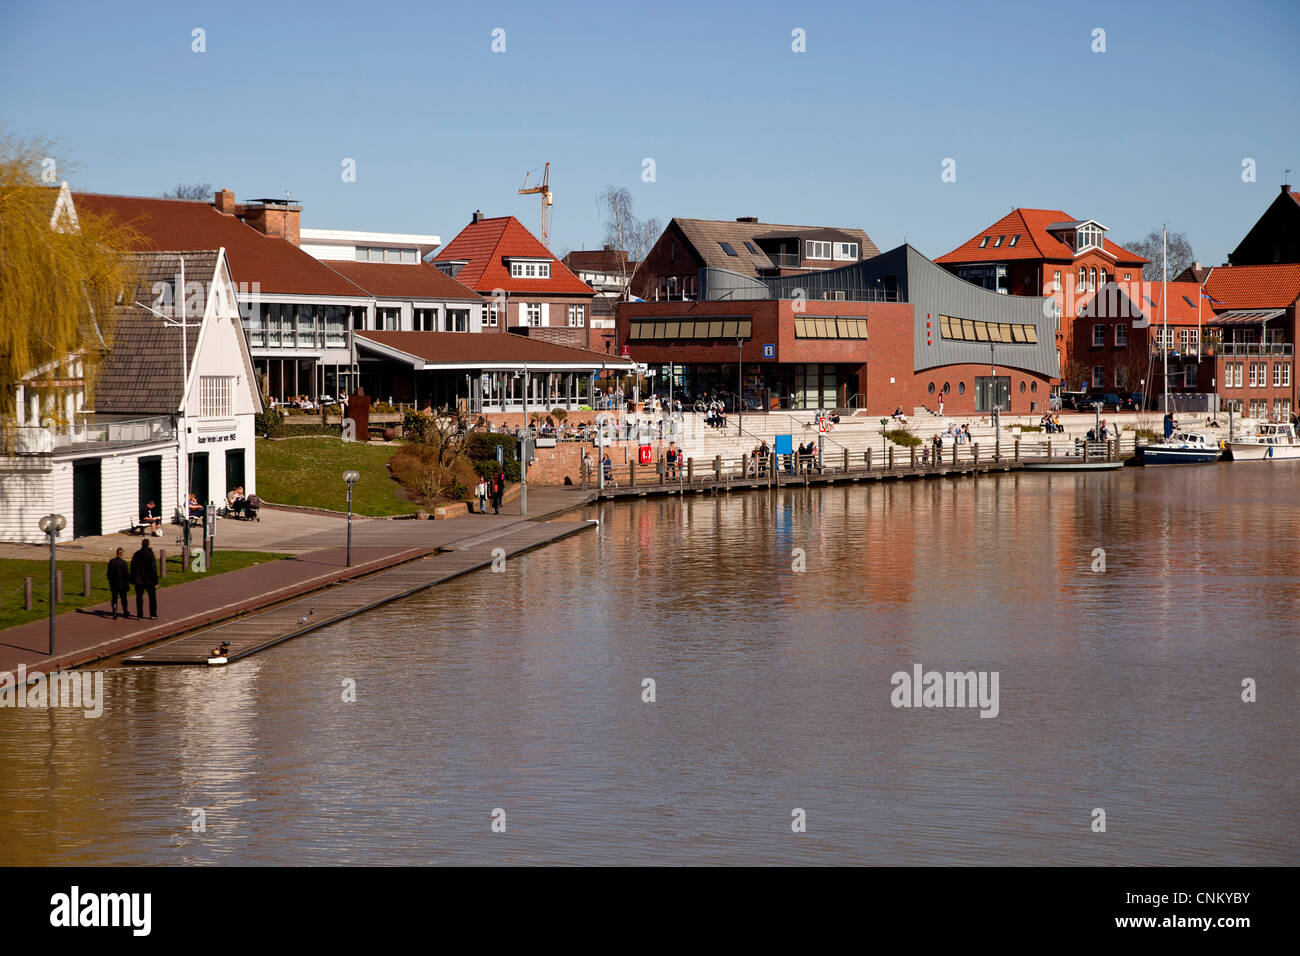 Ludwig-Klopp-Promenade at the harbour in Leer, East Frisia, Lower Saxony, Germany Stock Photo